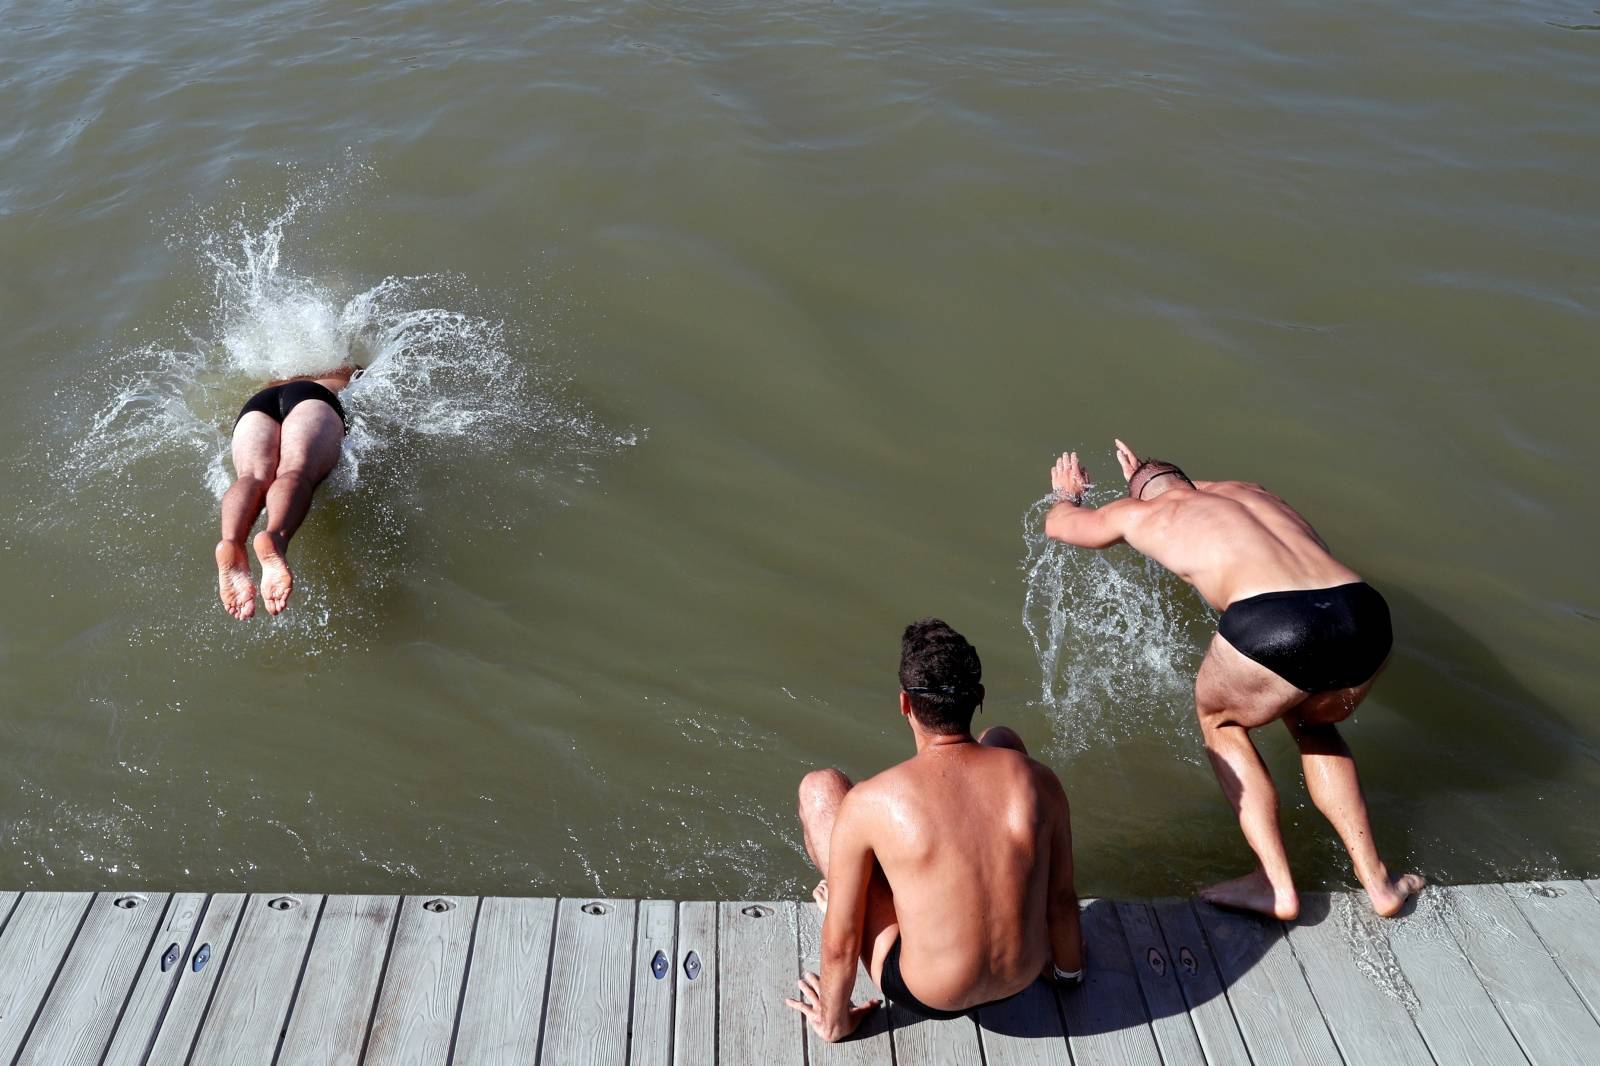 Participants swim across the Danube River during the Budapest Urban Games in Budapest